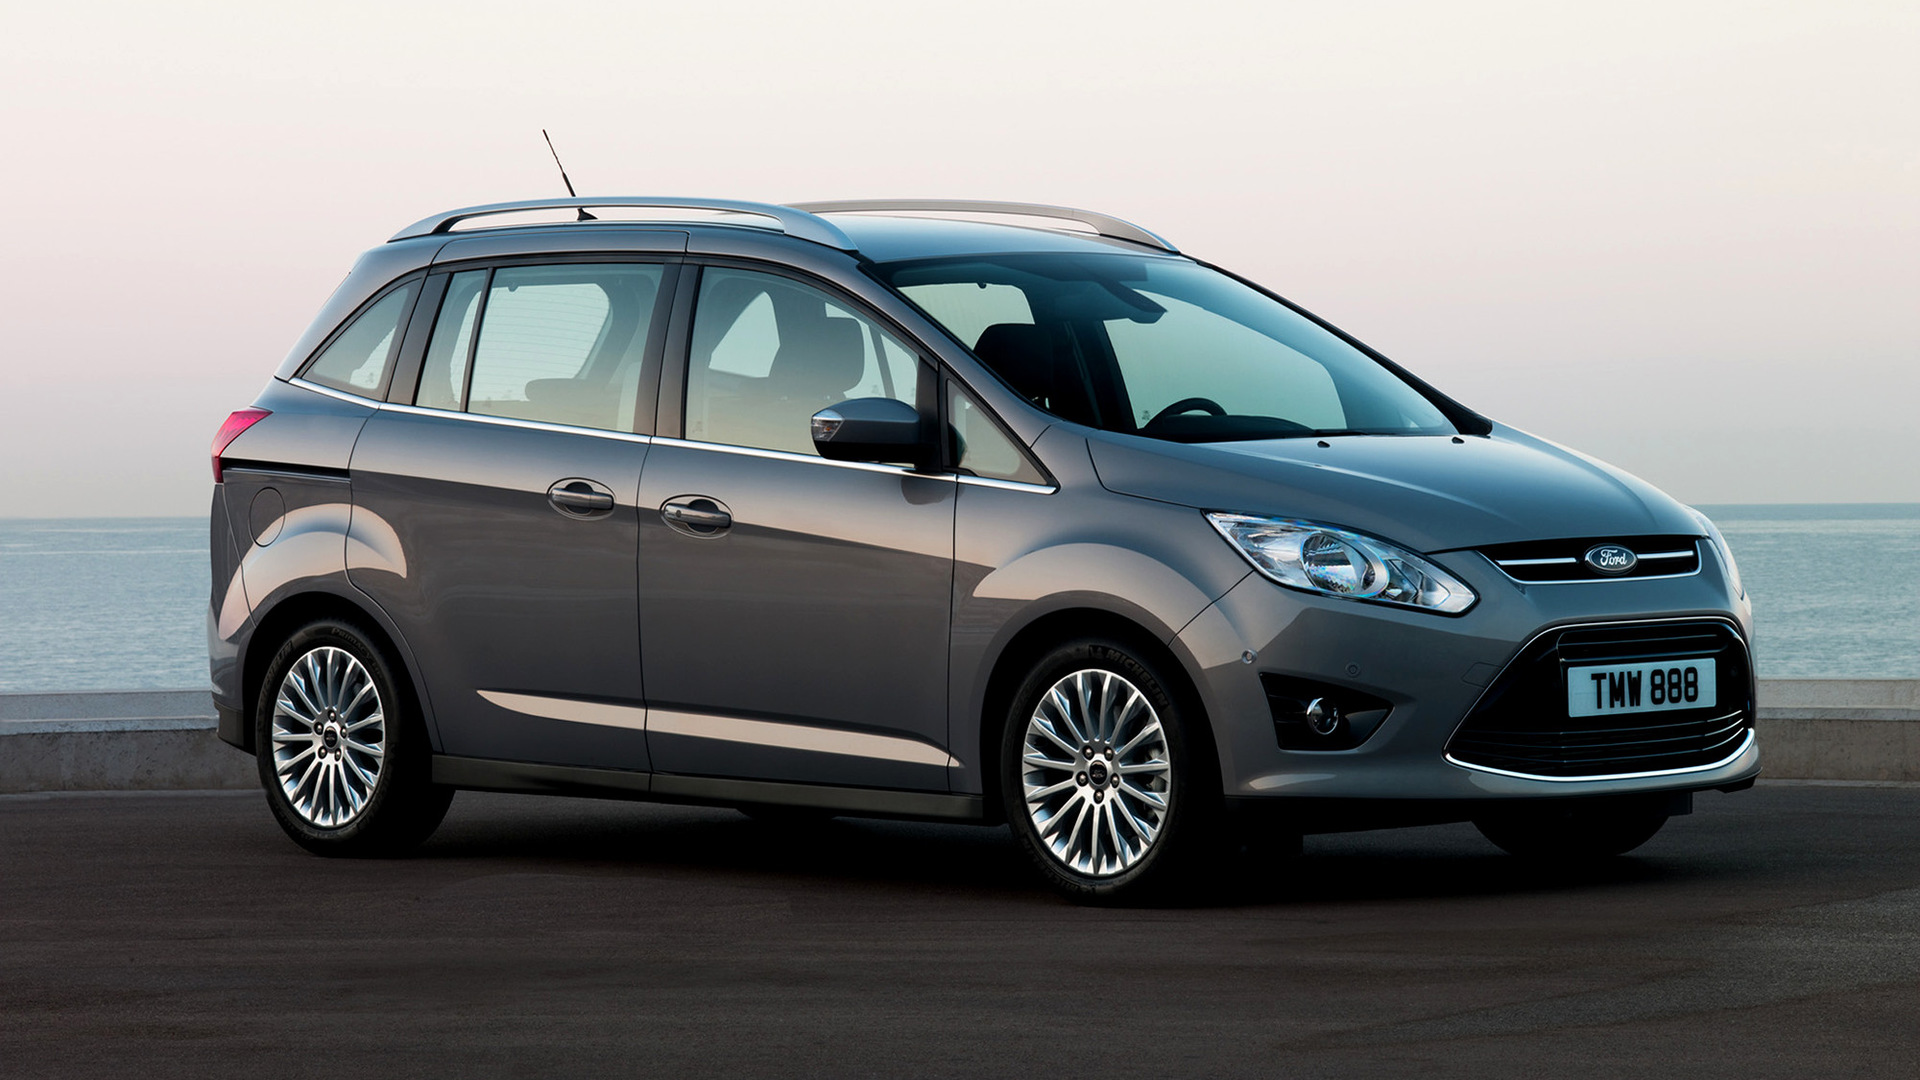 2010 Ford Grand CMAX HD Wallpaper Background Image